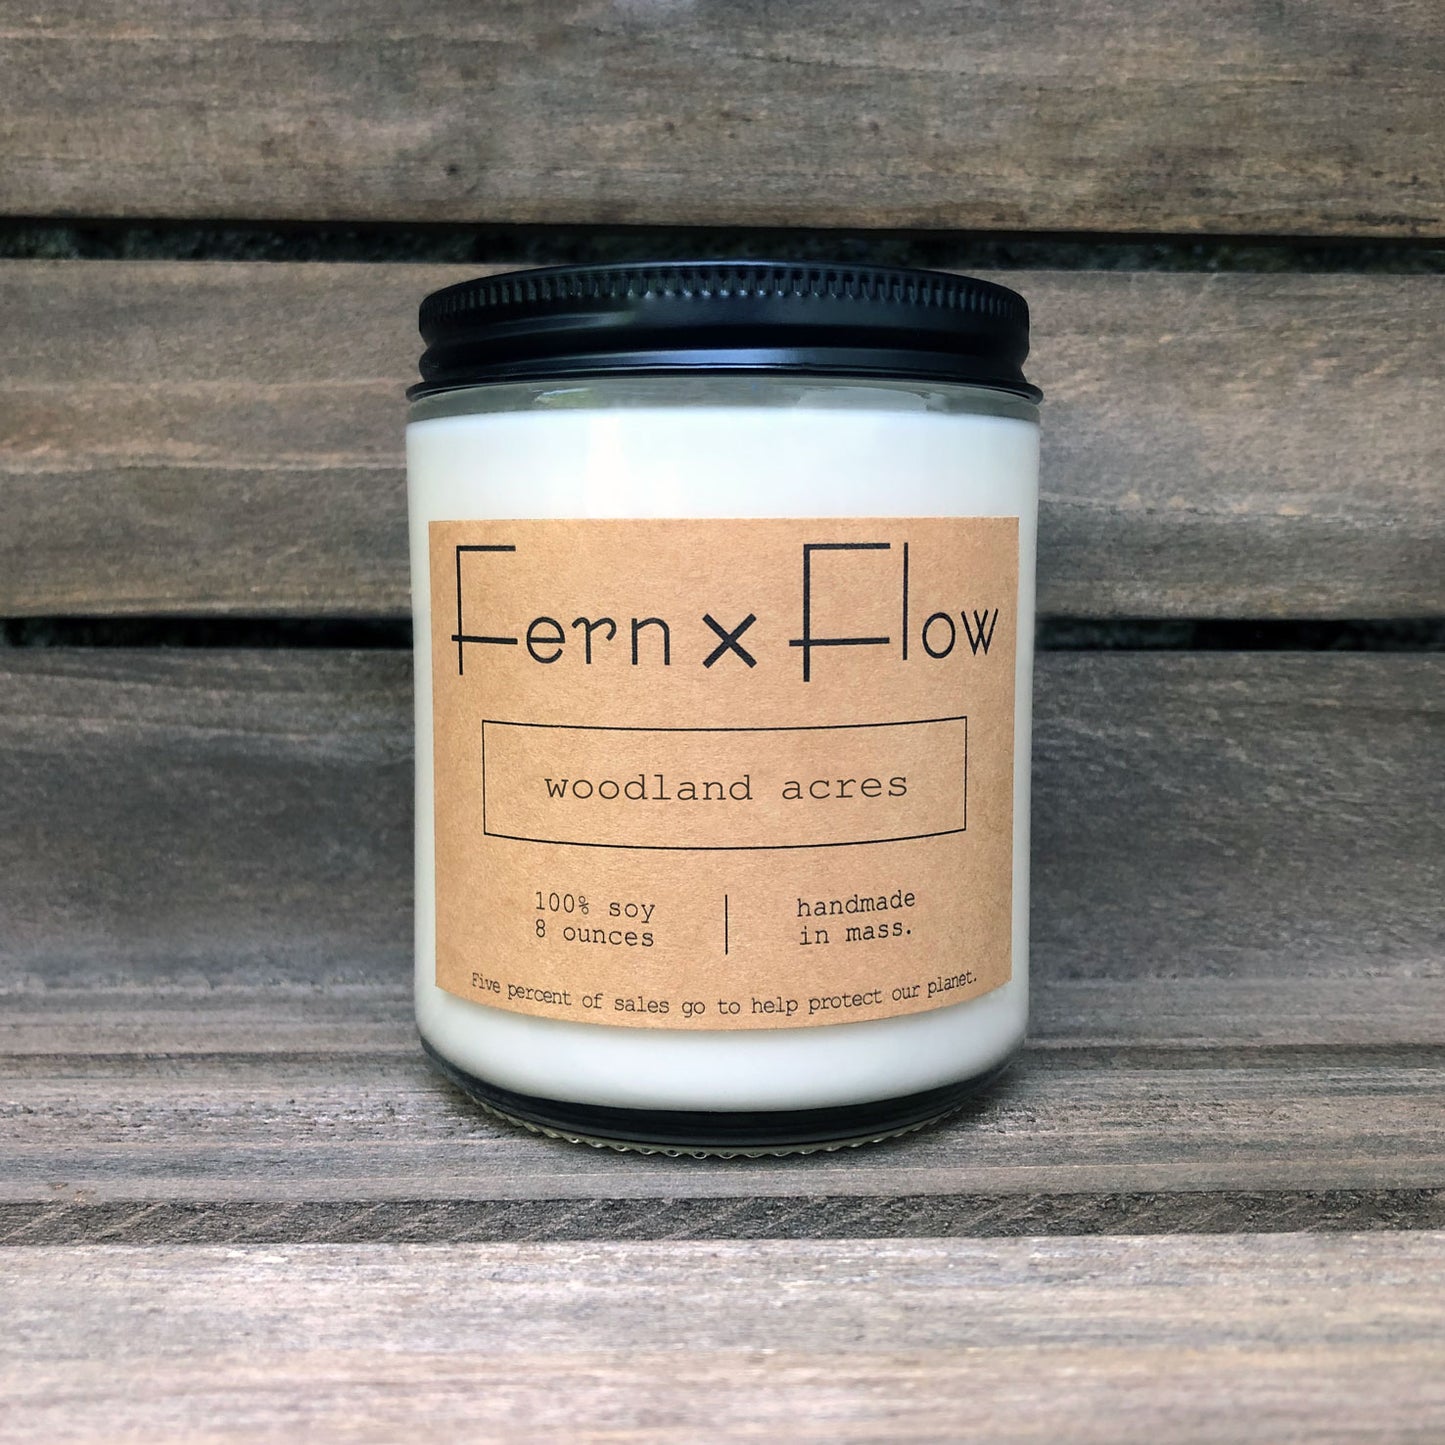 Eight-ounce Fern x Flow Woodland Acres scented soy candle against a weathered, wooden crate.